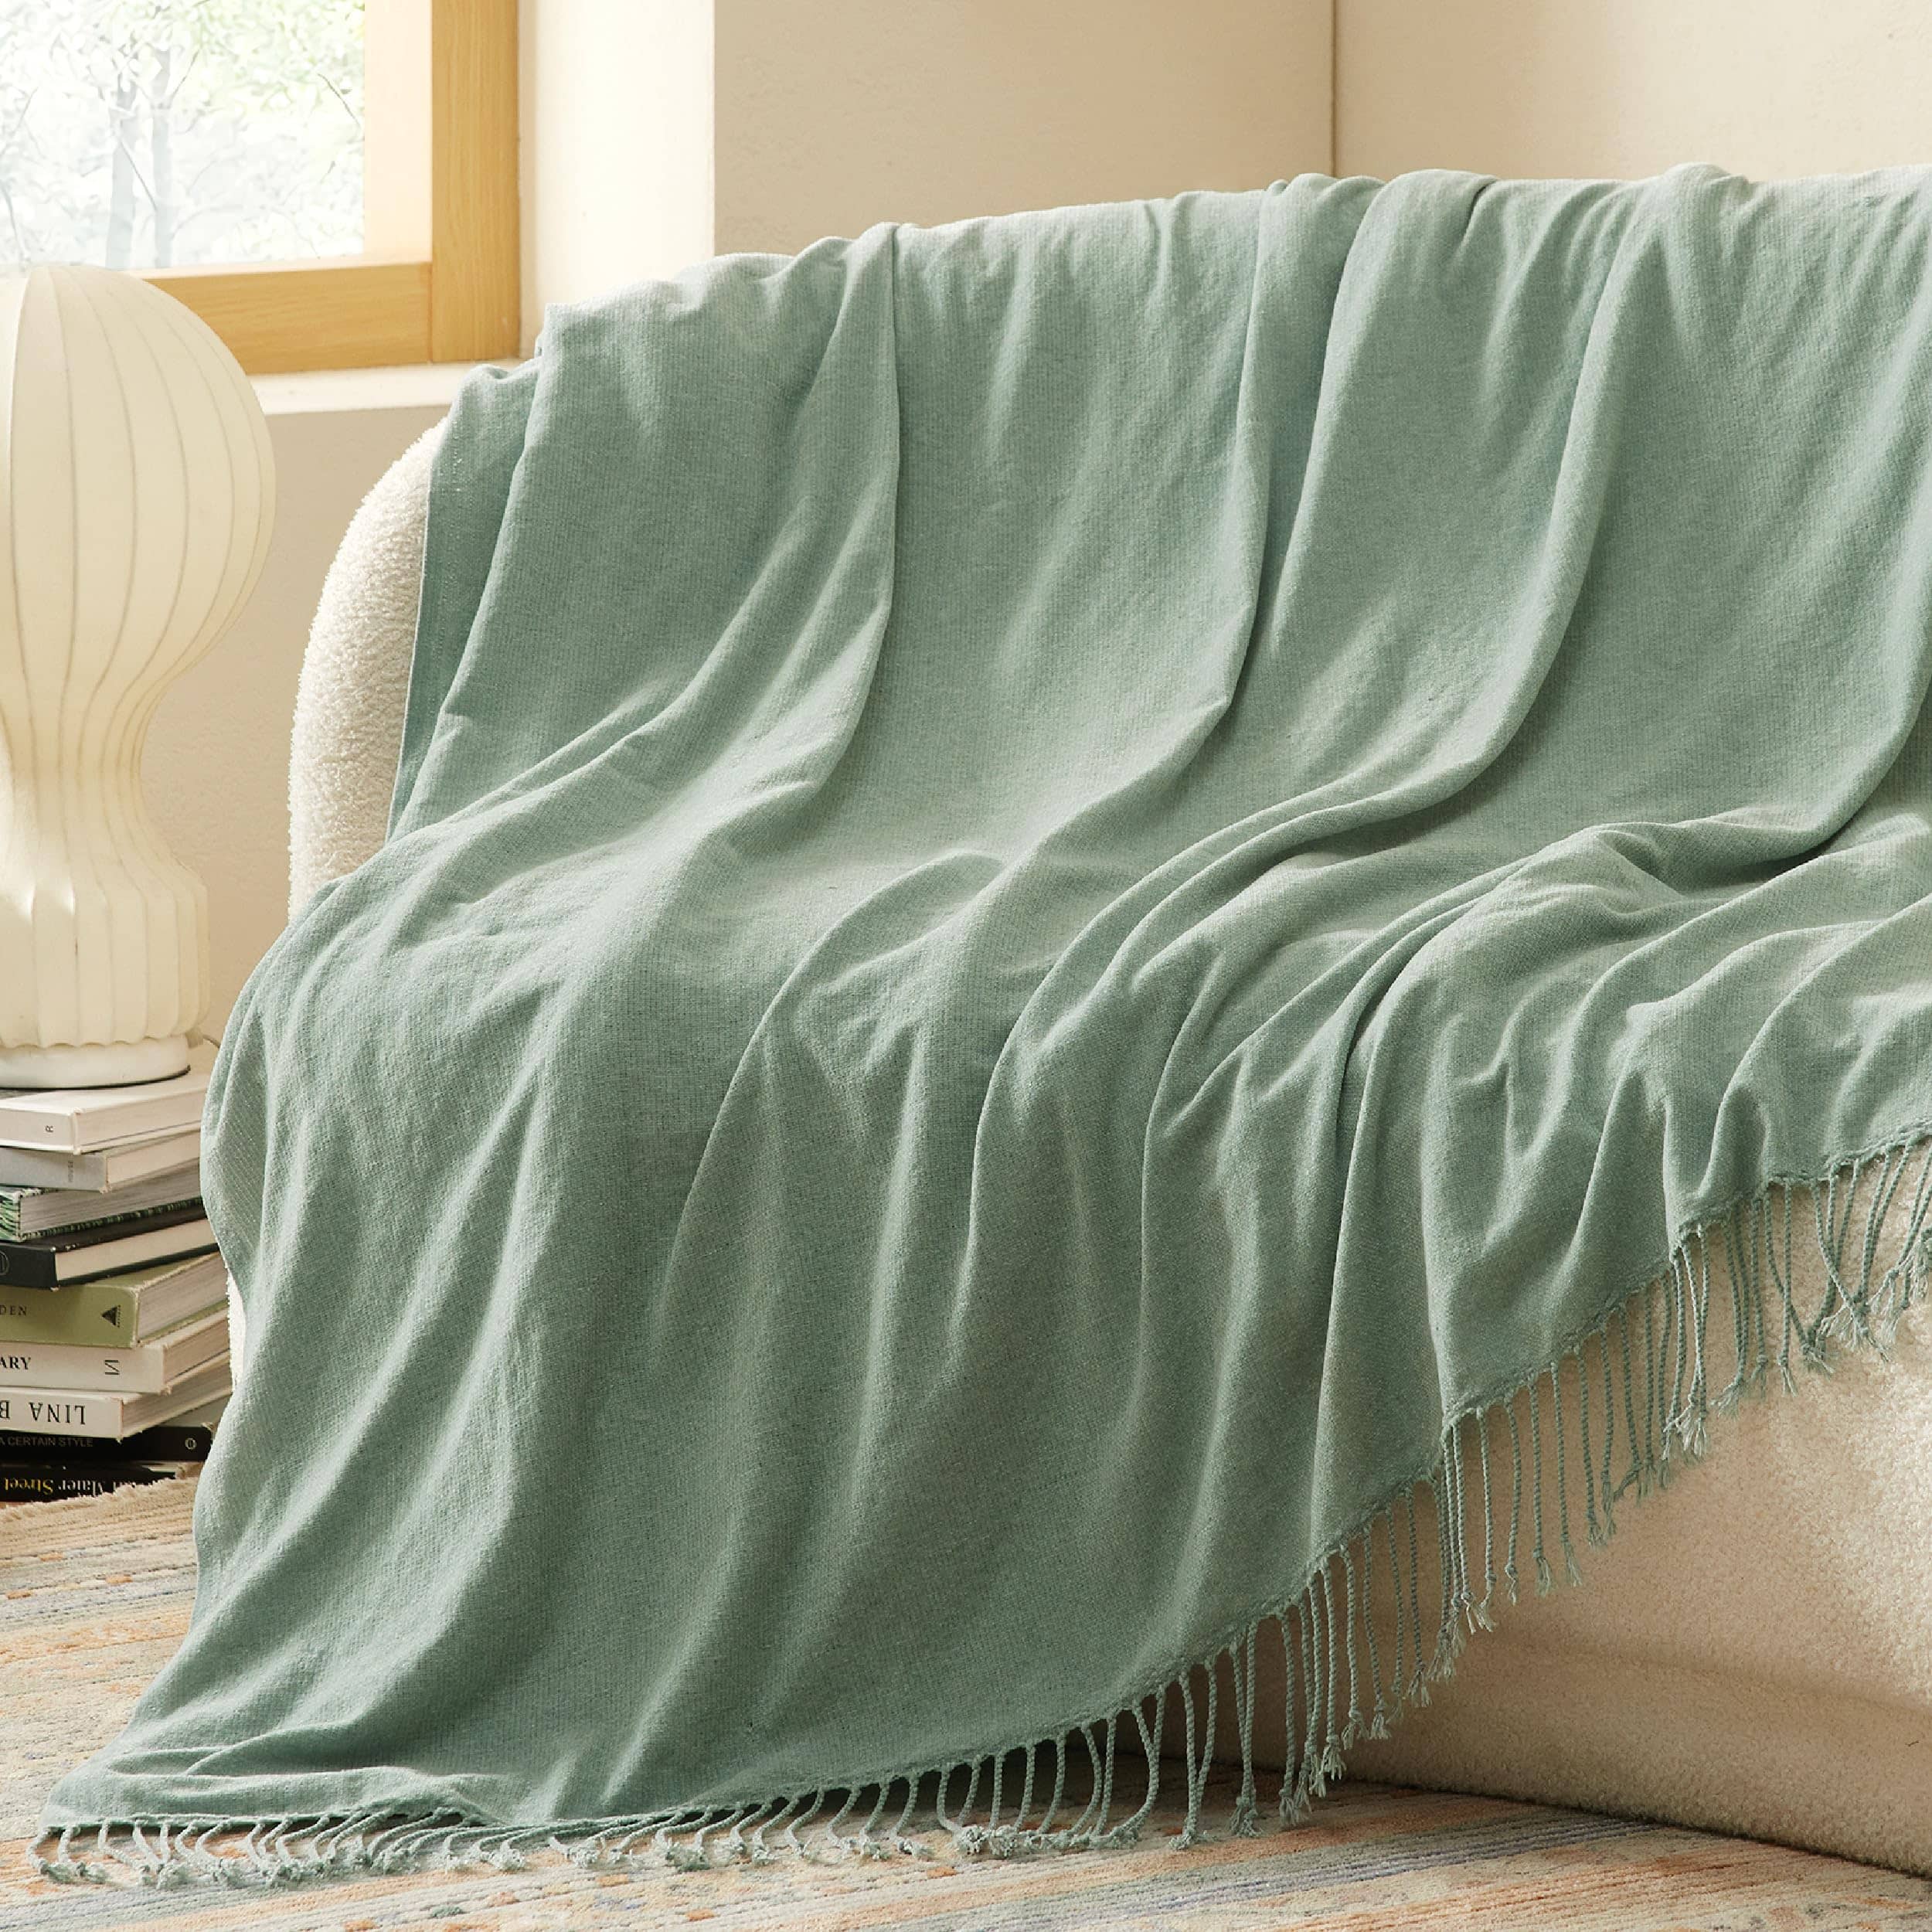 Bedsure Woven Chenille Blanket with Tassels